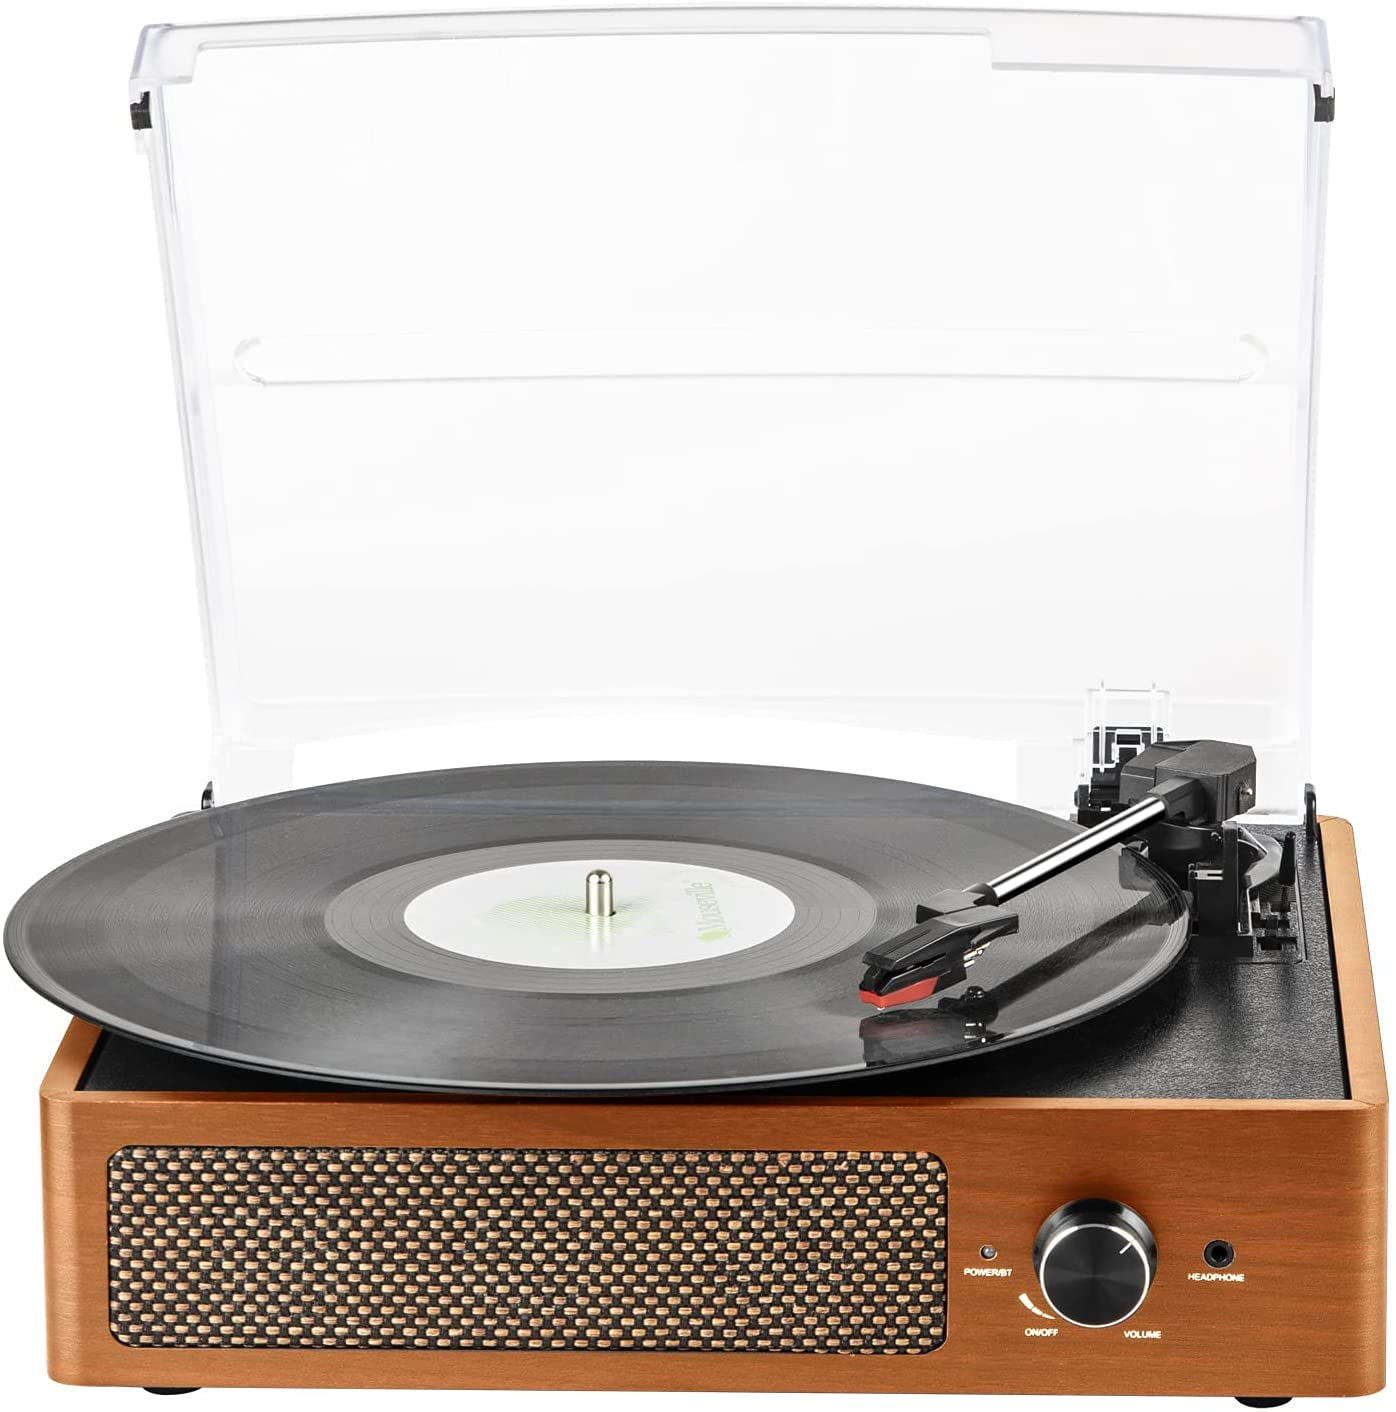 Vinyl Record Player Bluetooth Turntable 3 Speed Vintage LP Record Player with Built in Stereo Speakers Belt Driven Portable Nostalgic Phonograph 